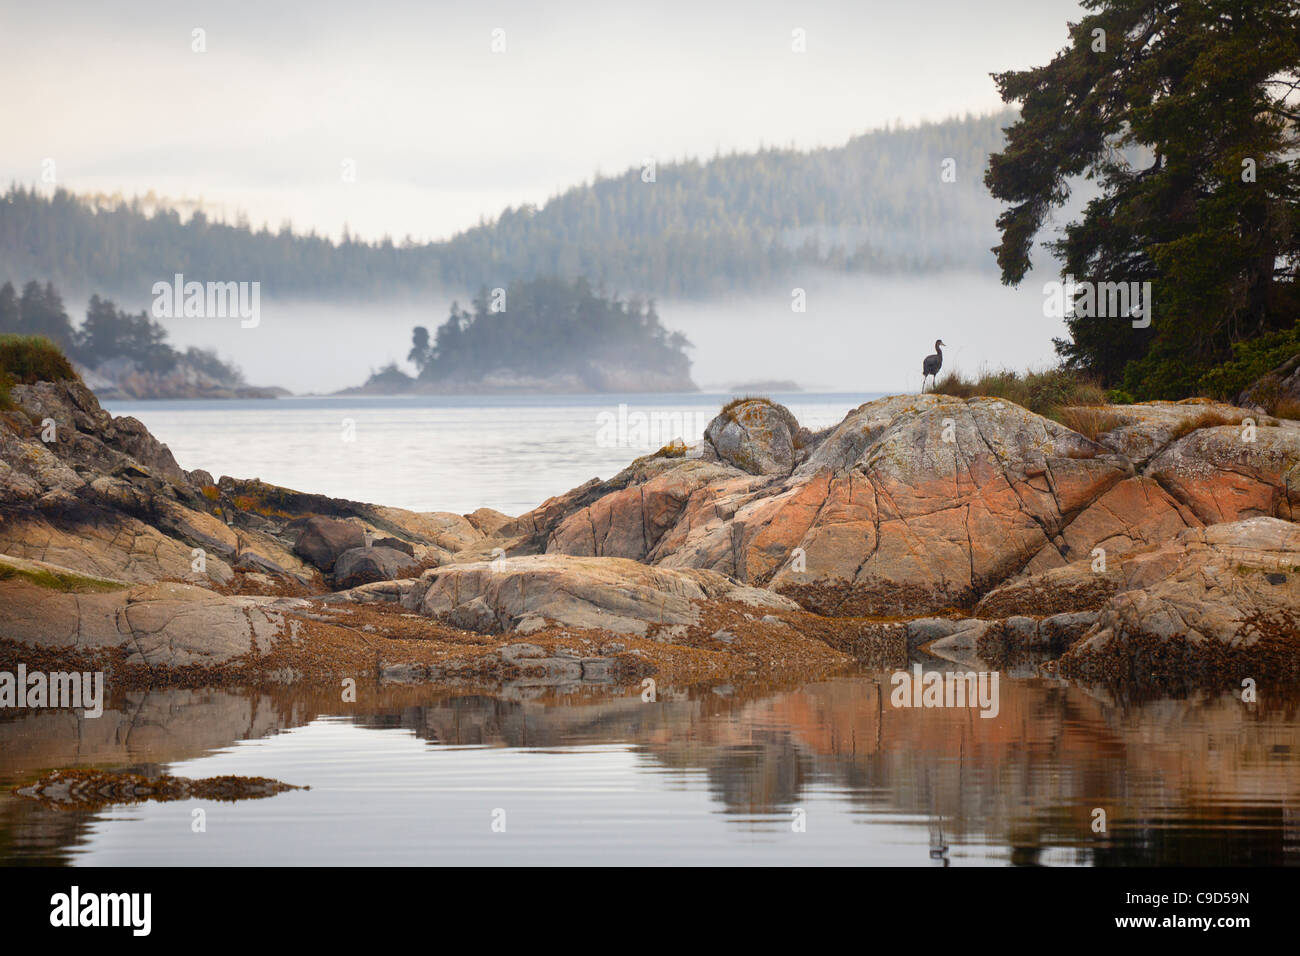 Rock formations in a strait, Village Island, British Columbia, Canada Stock Photo